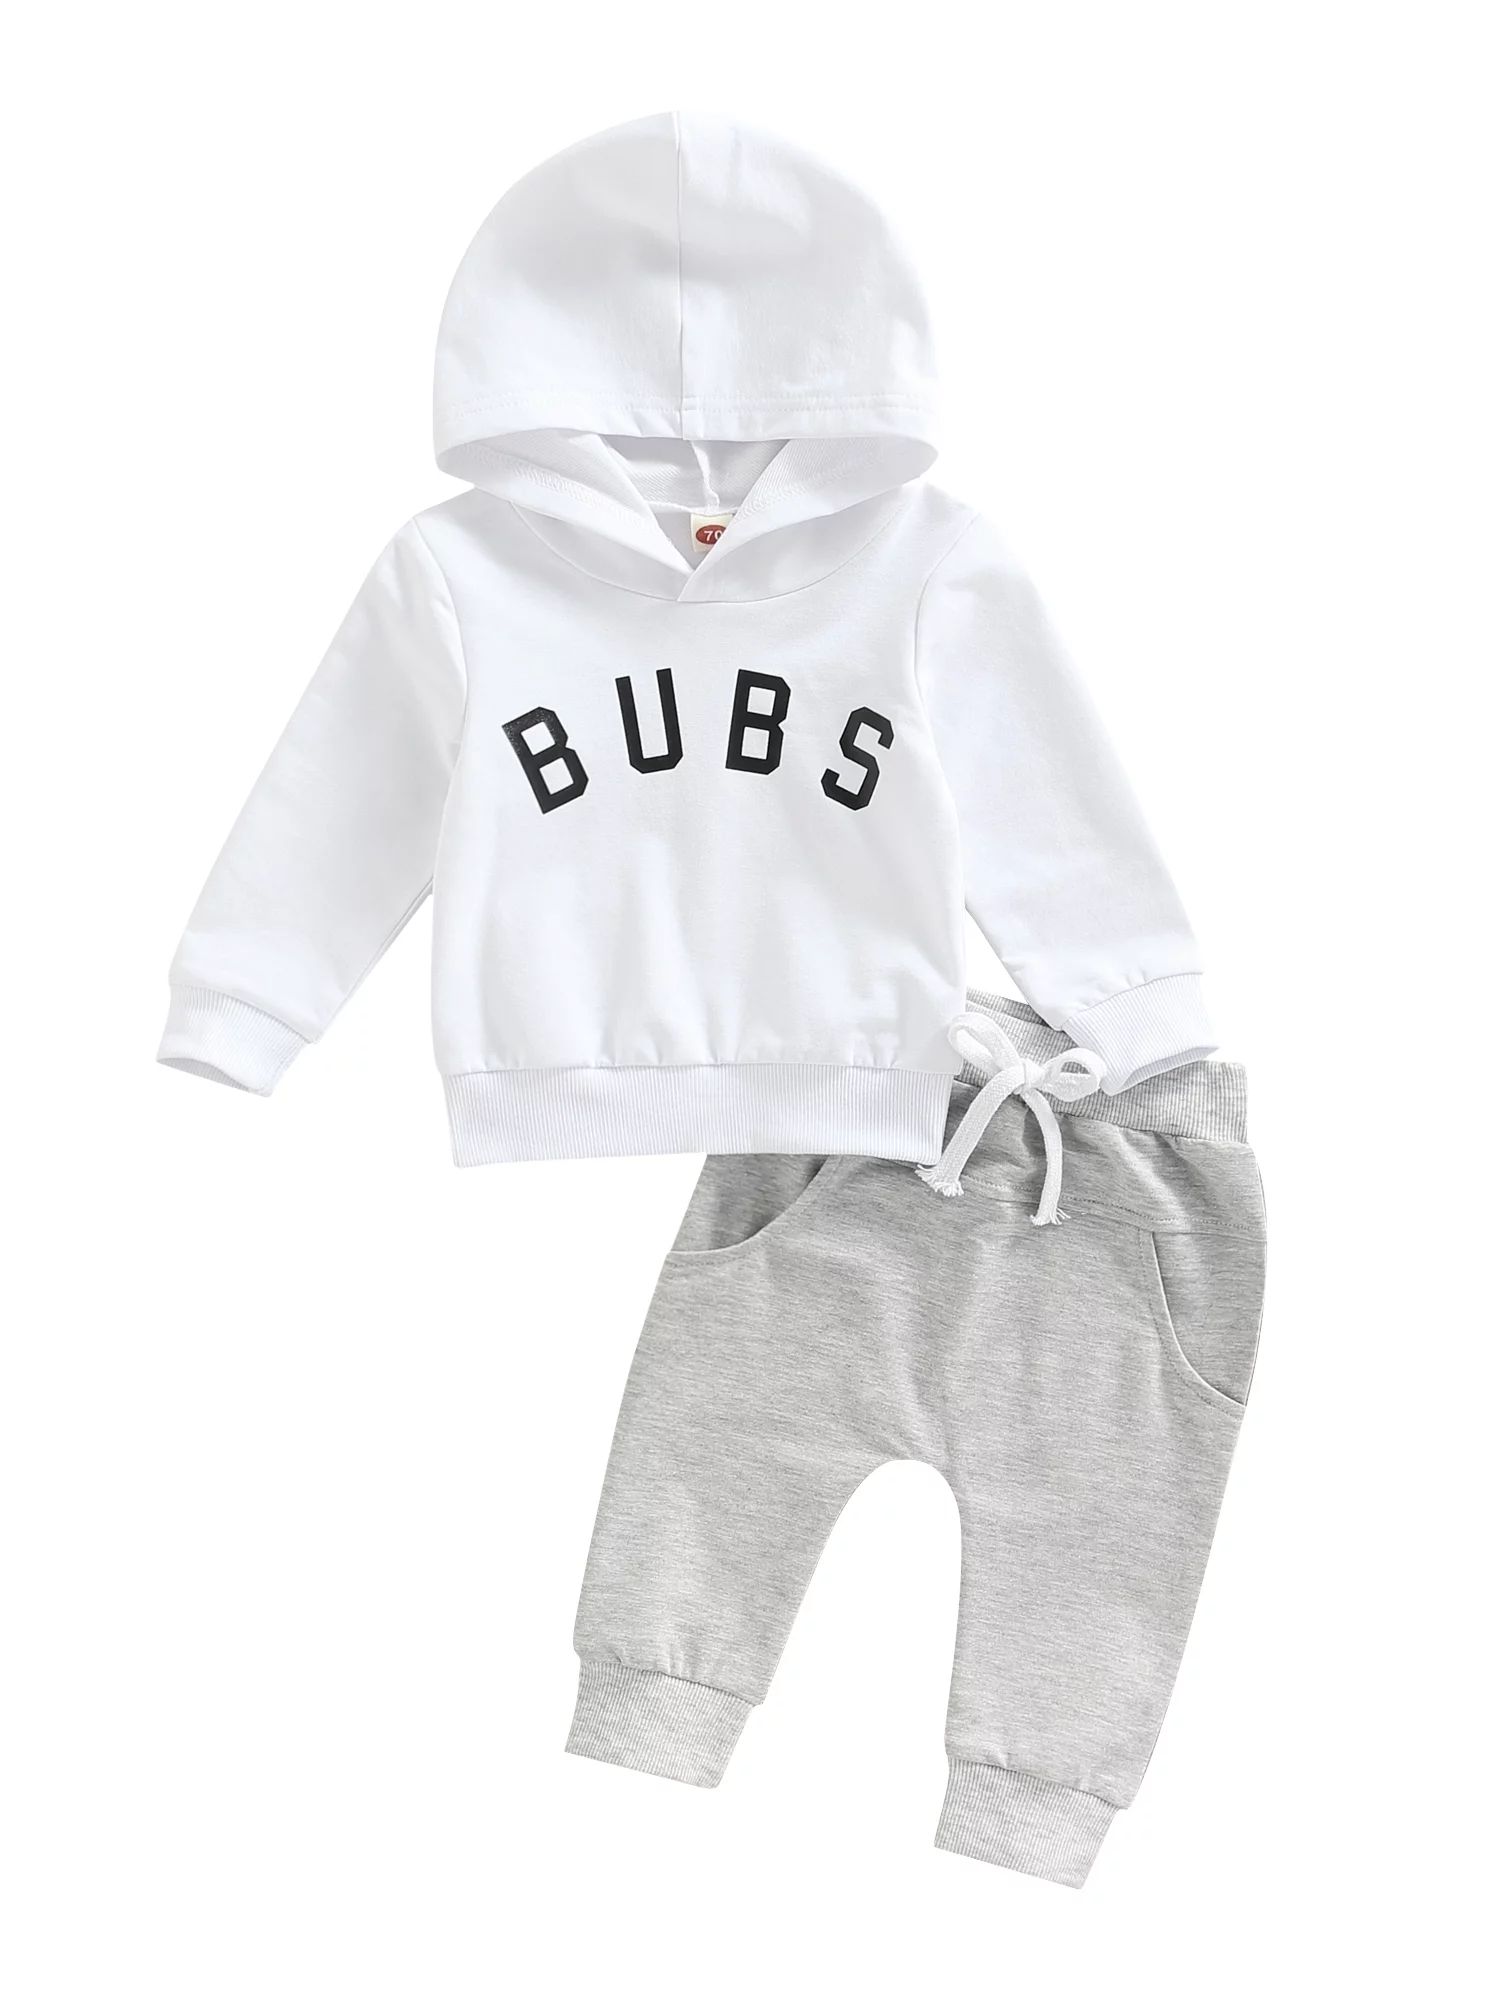 TheFound Newborn Baby Boy 2Pcs Fall Outfits BUBS Letter Print Long Sleeve Hooded Pullover Drawstr... | Walmart (US)